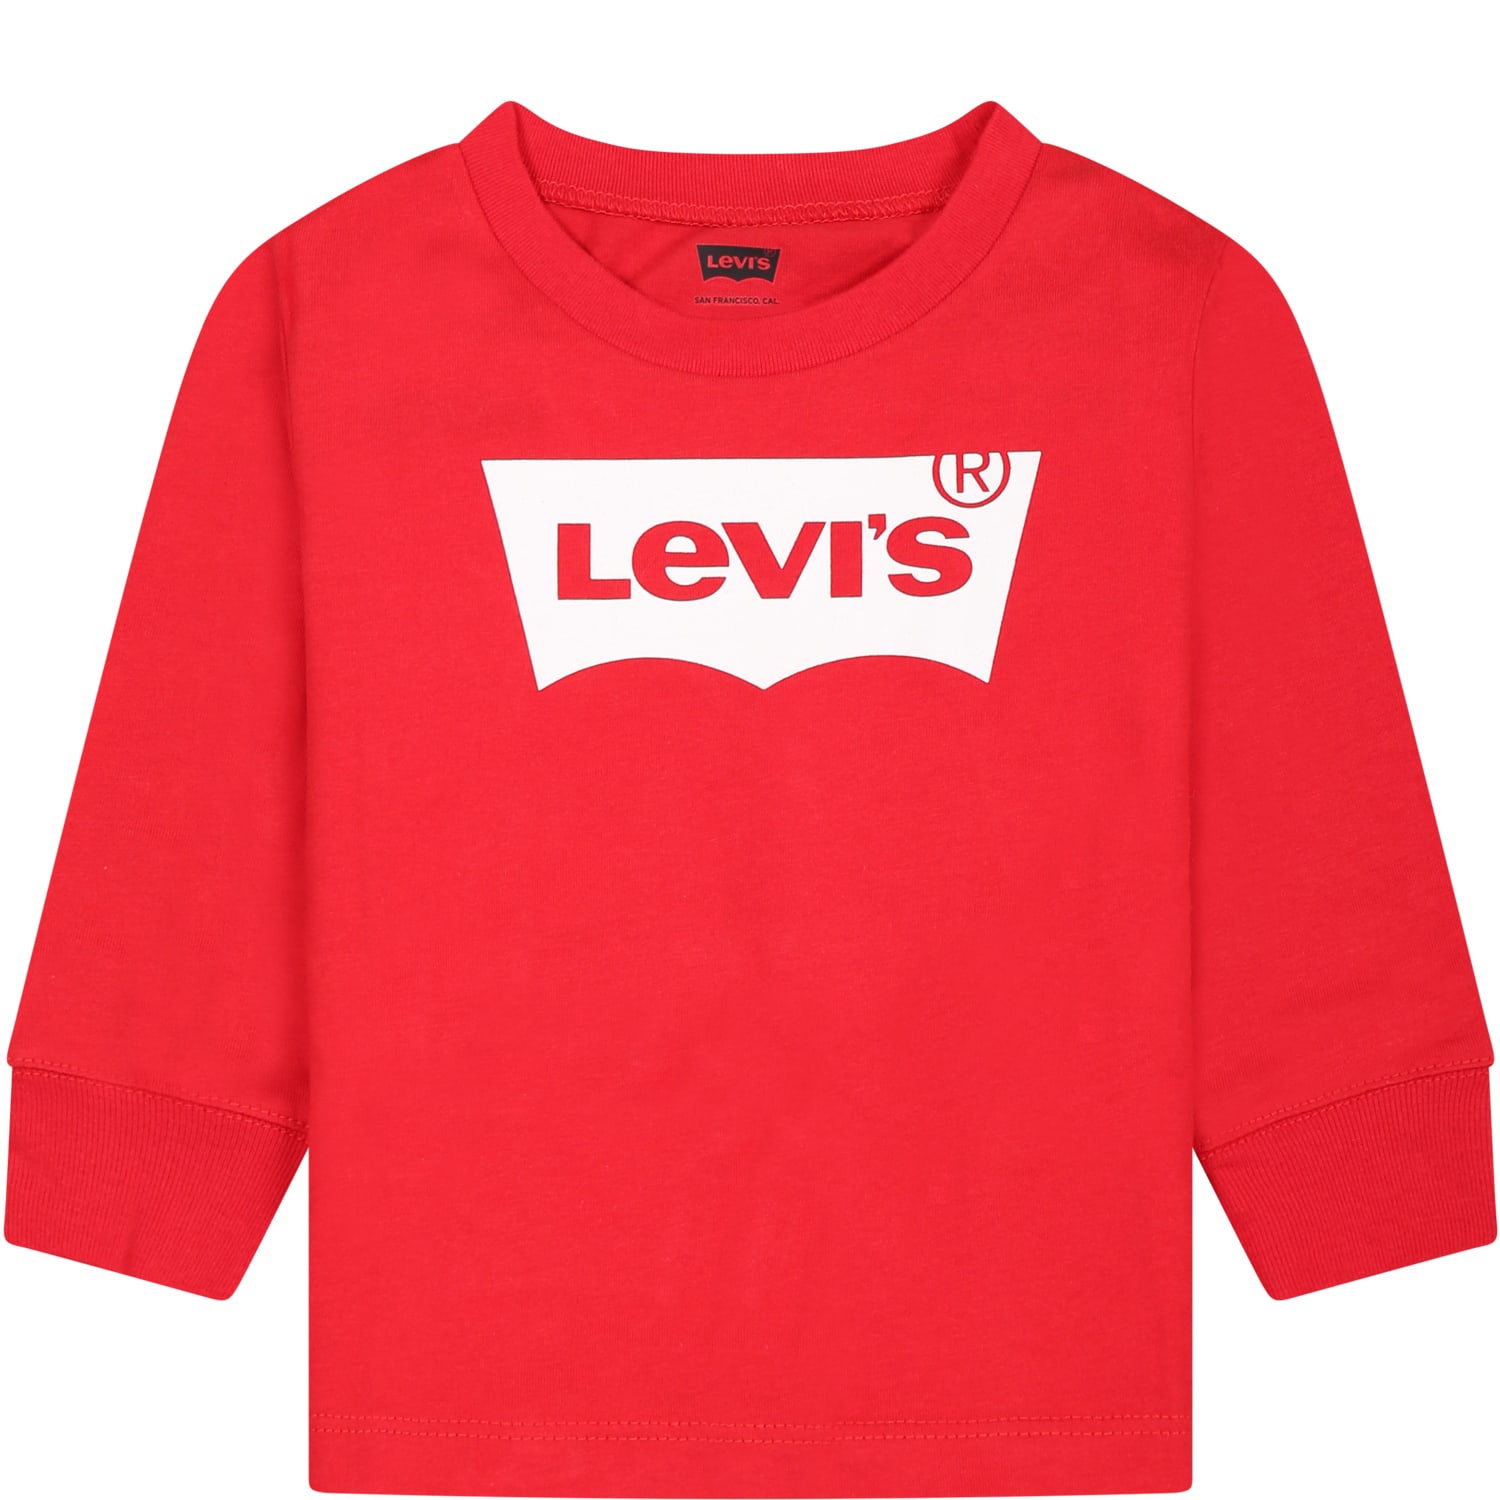 LEVI'S RED T-SHIRT FOR BABIES WITH LOGO